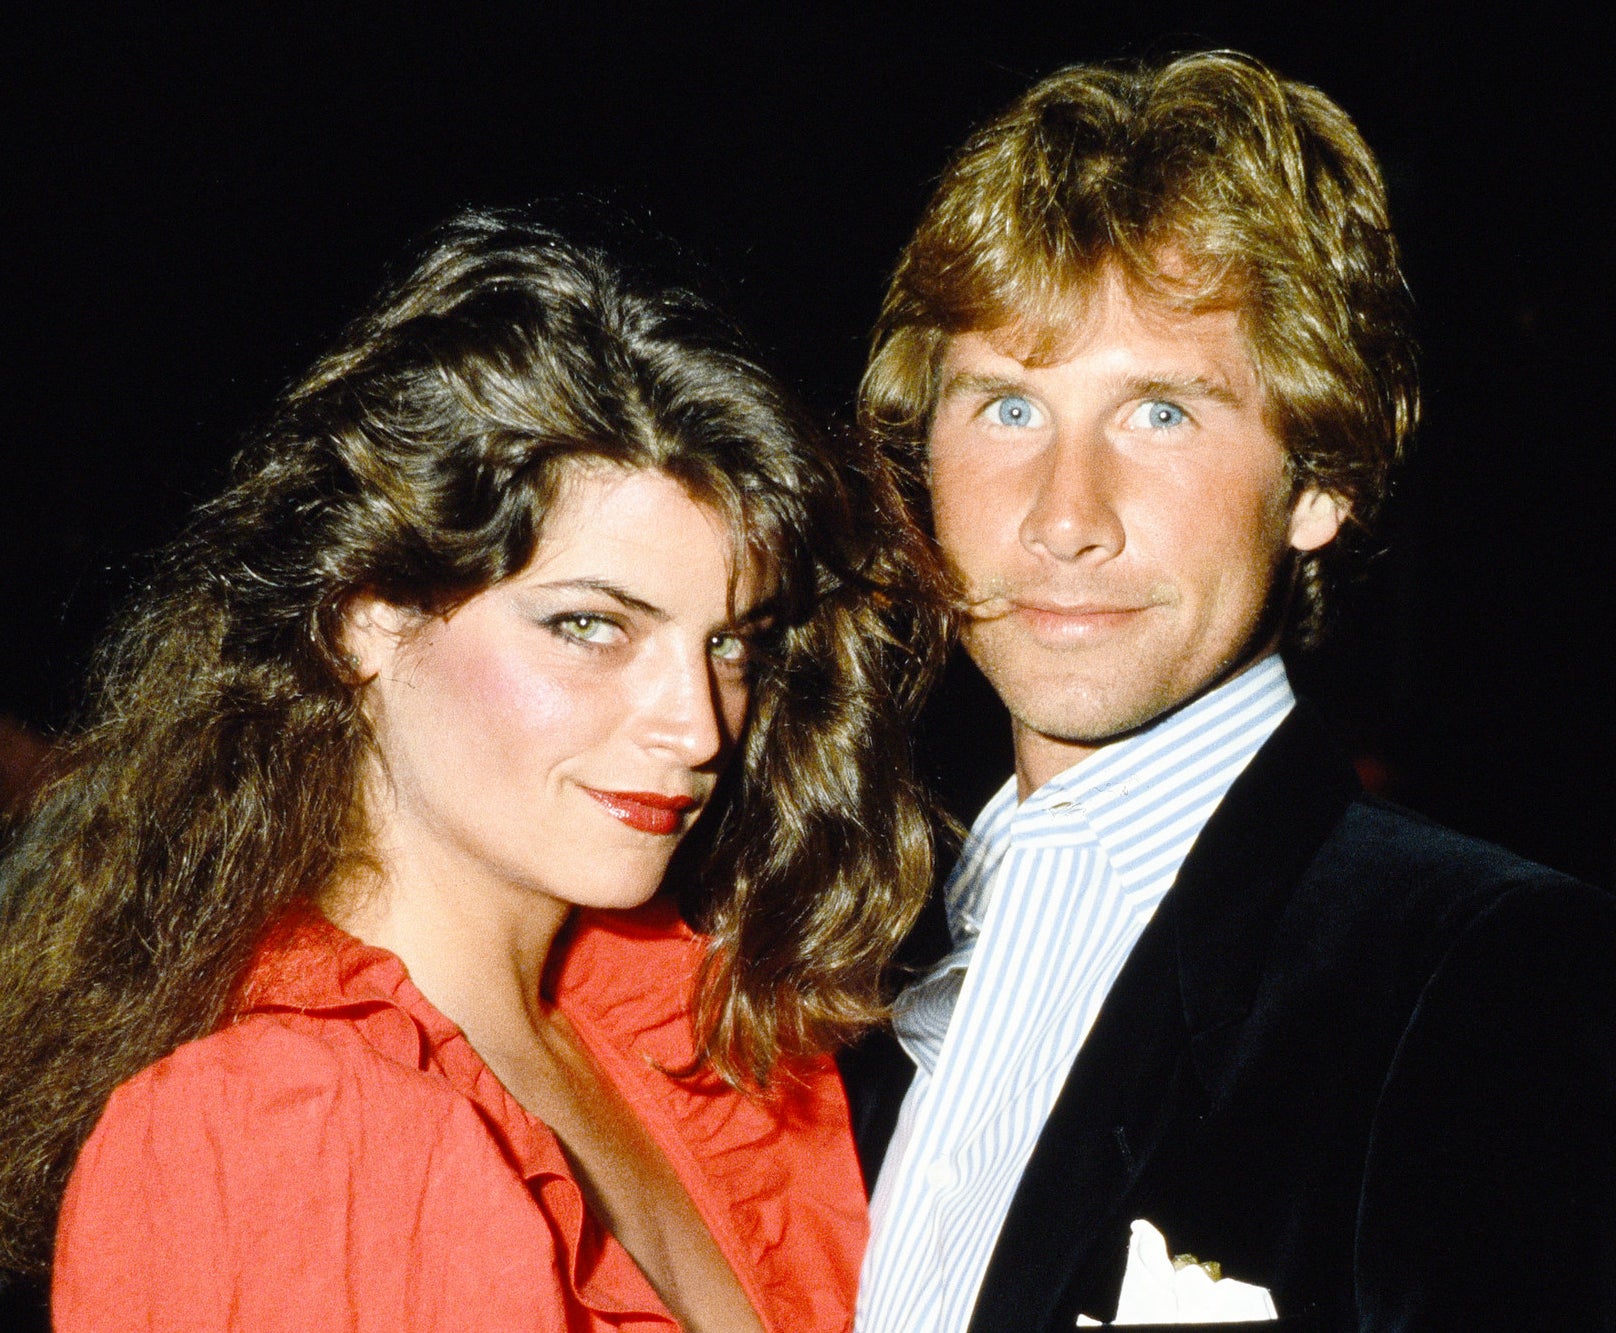 Kirstie Alley and Parker Stevenson posing together